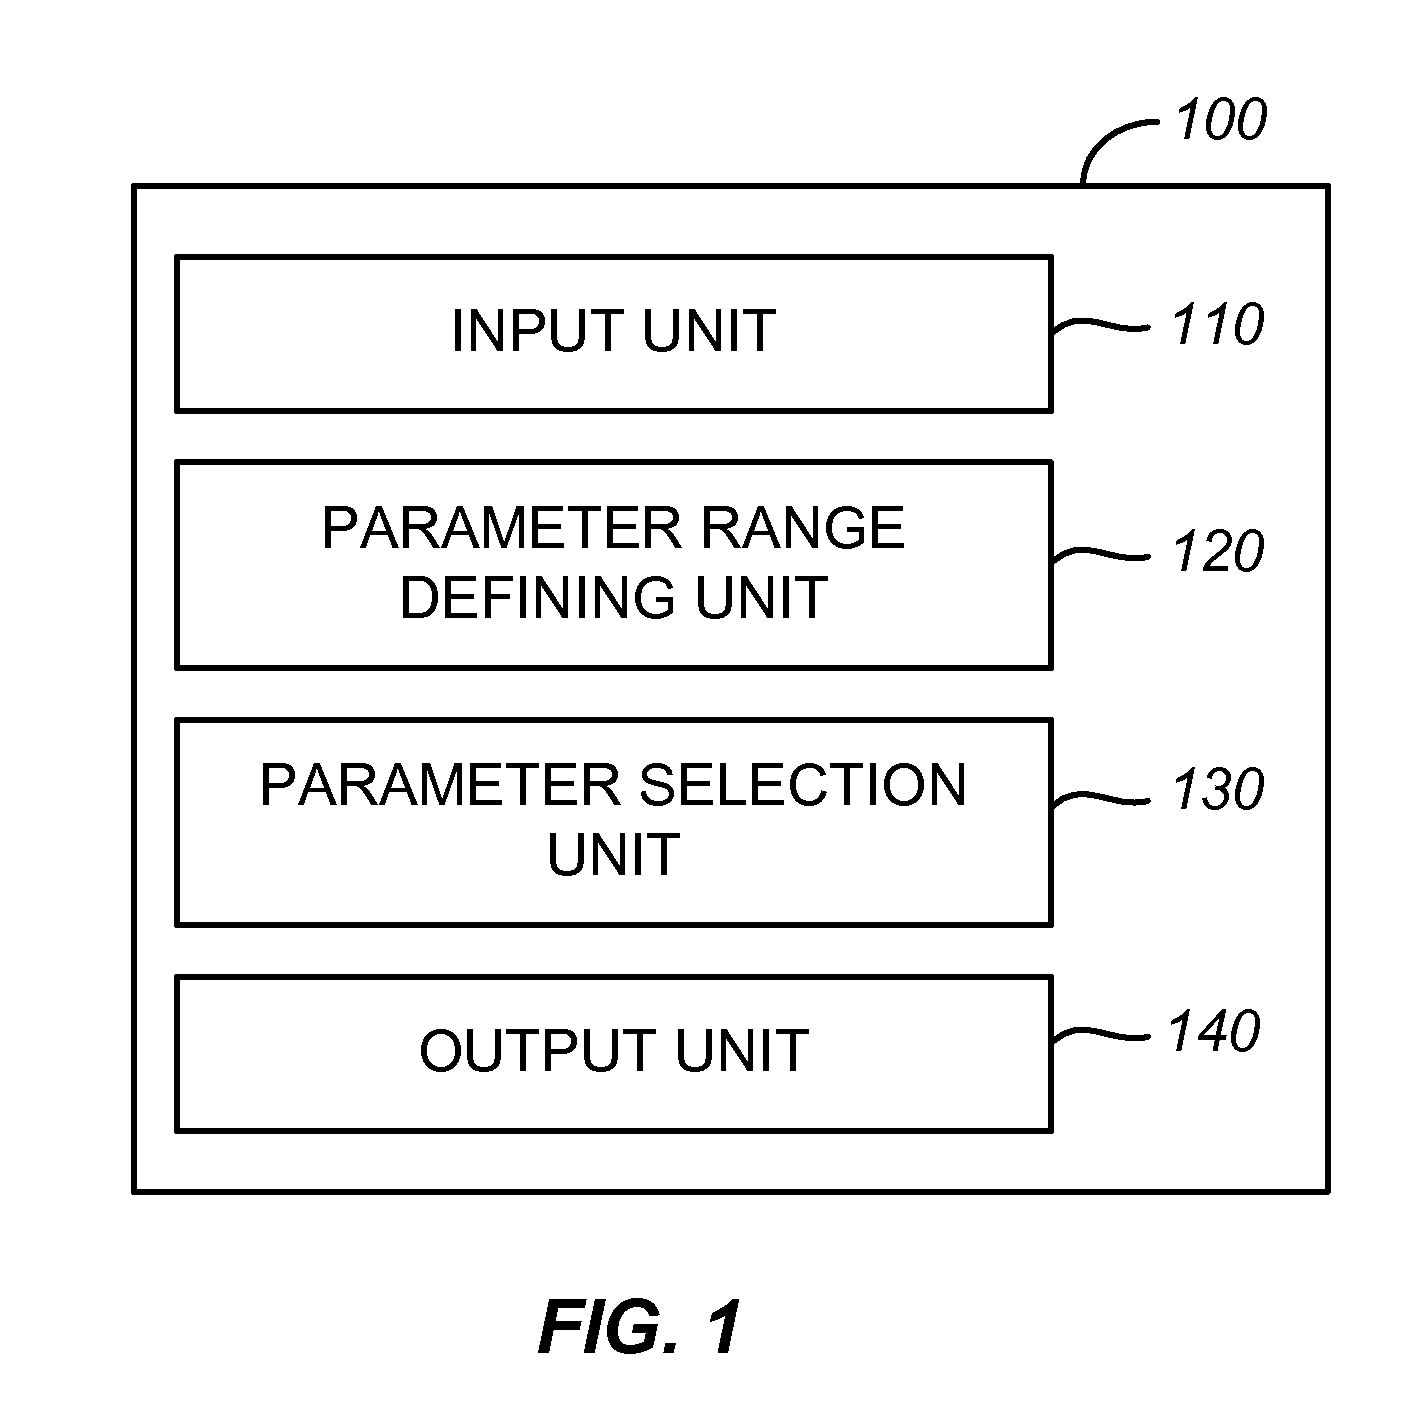 Feature detection apparatus and method for measuring object distances